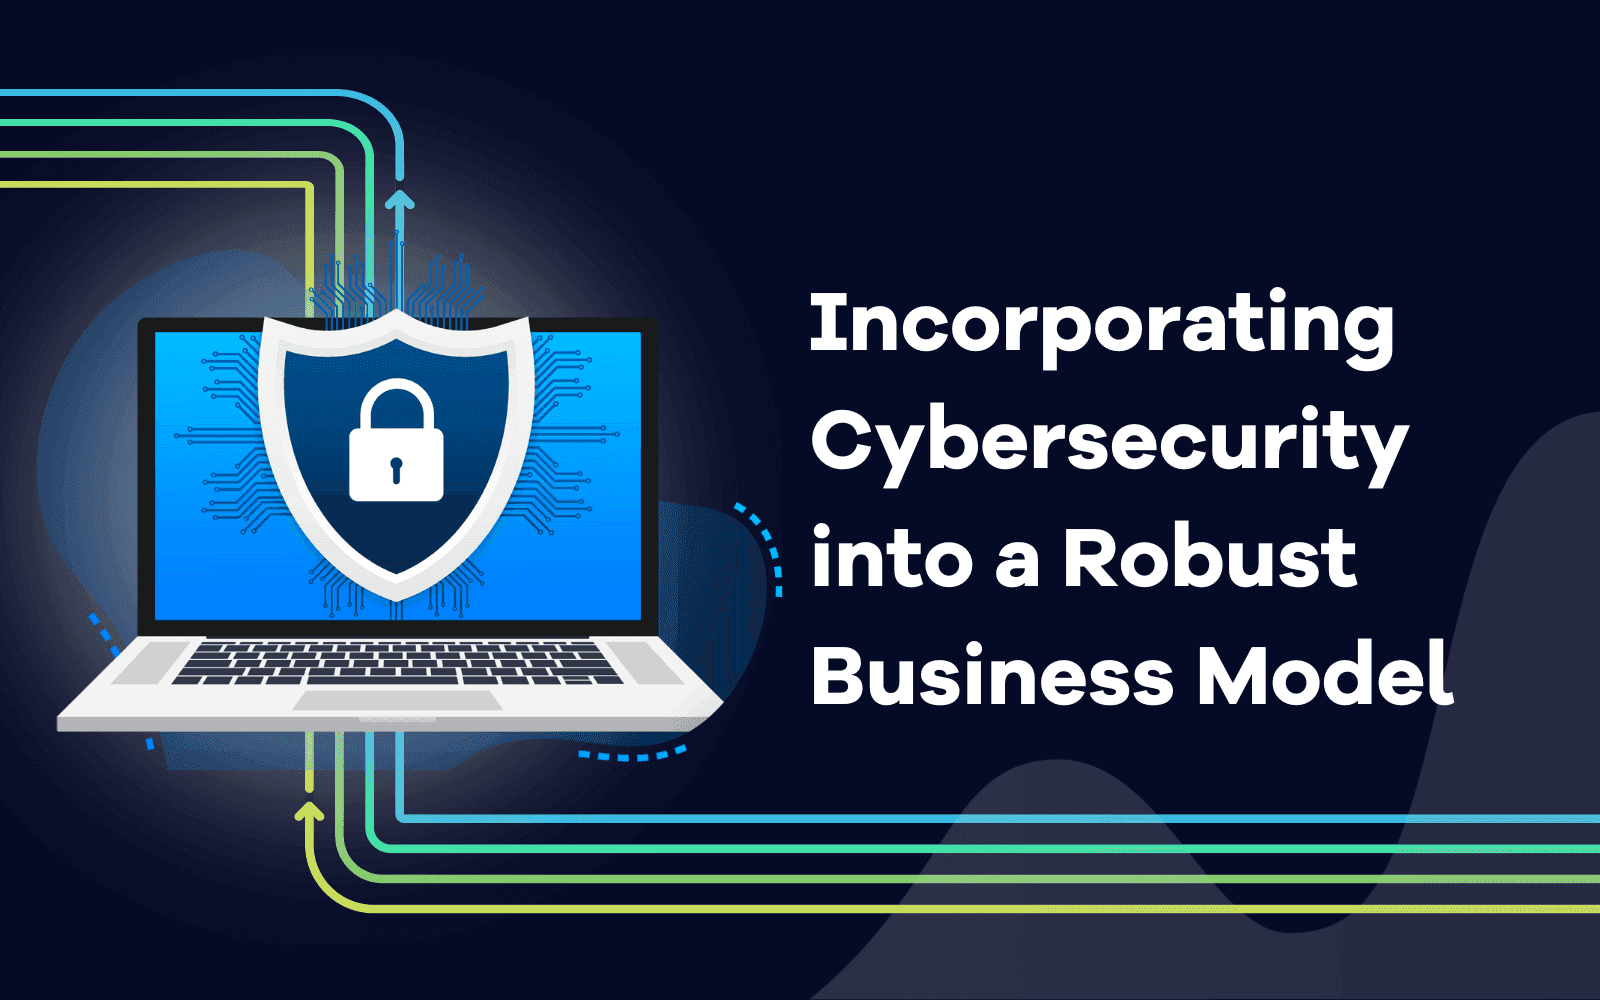 Incorporating Cybersecurity into a Robust Business Model